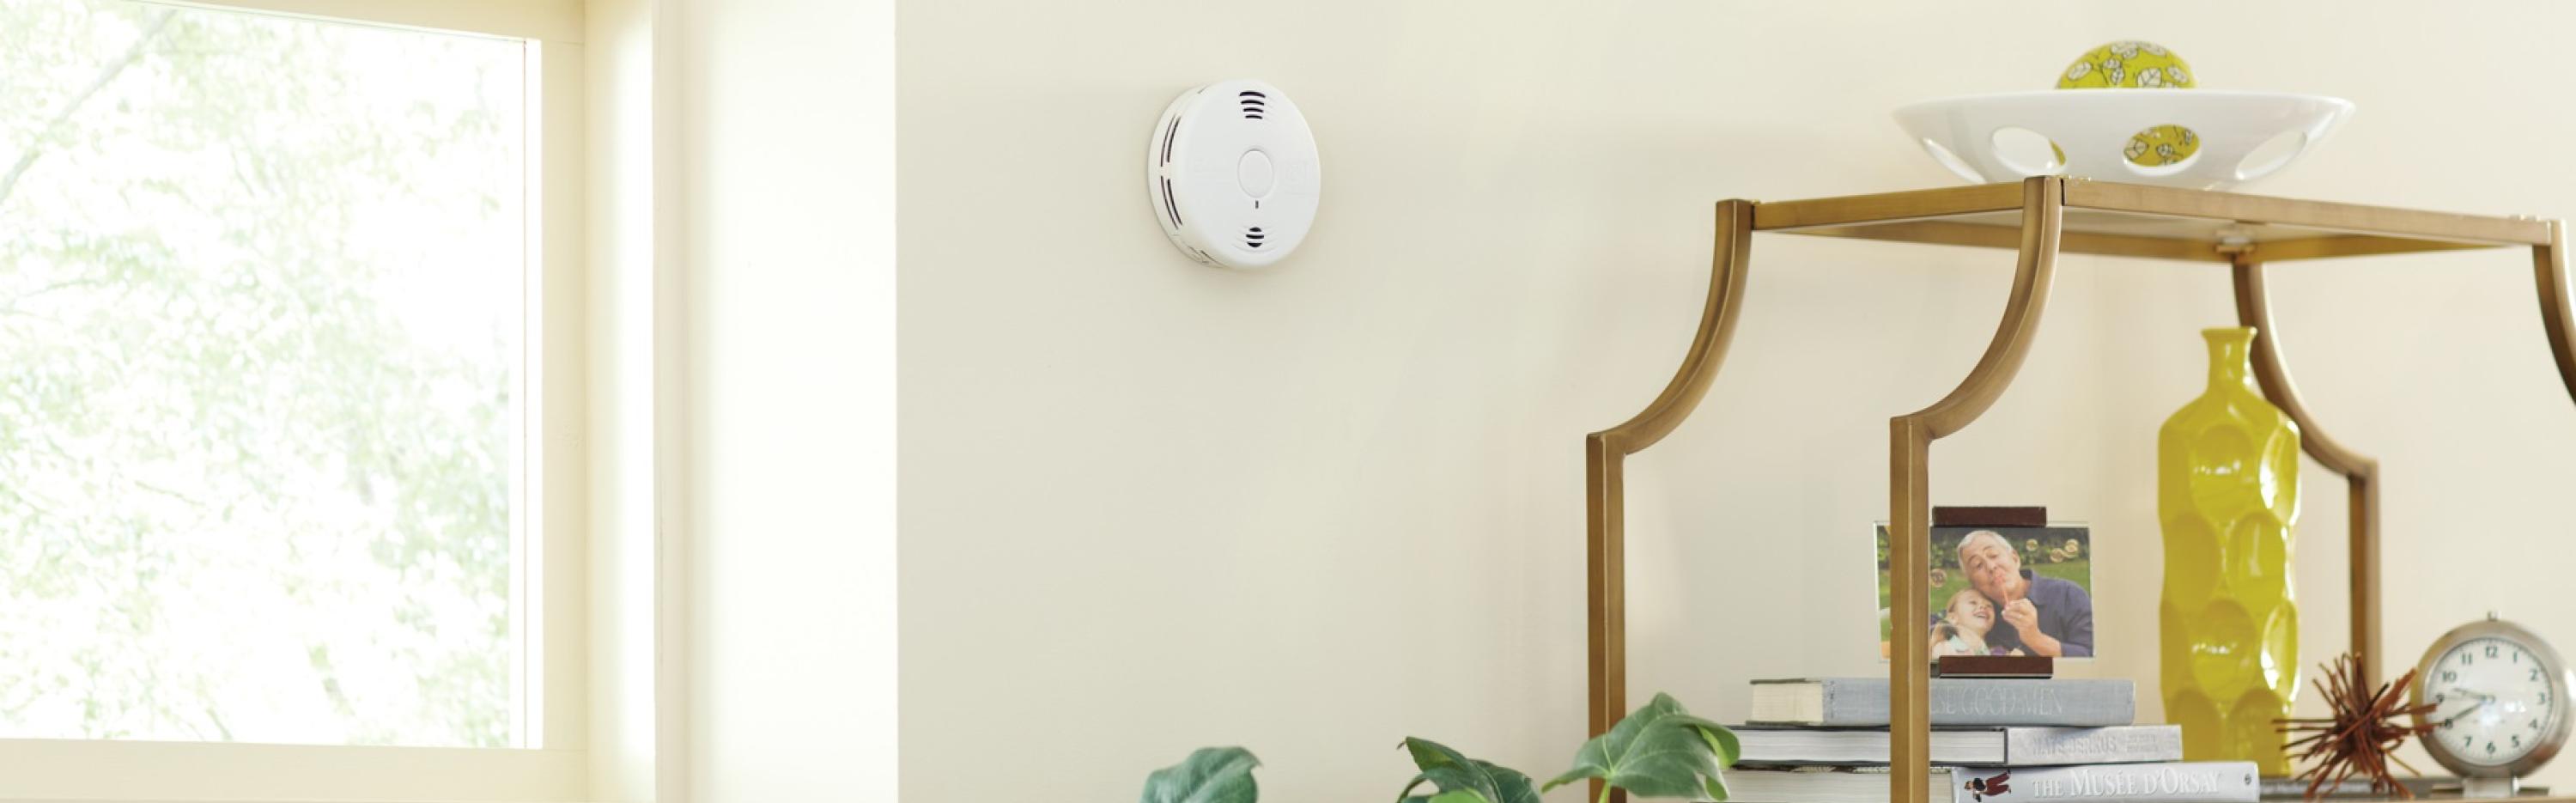 New Smoke Alarm Technology Lets You Be "Worry-Free" for 10 Years